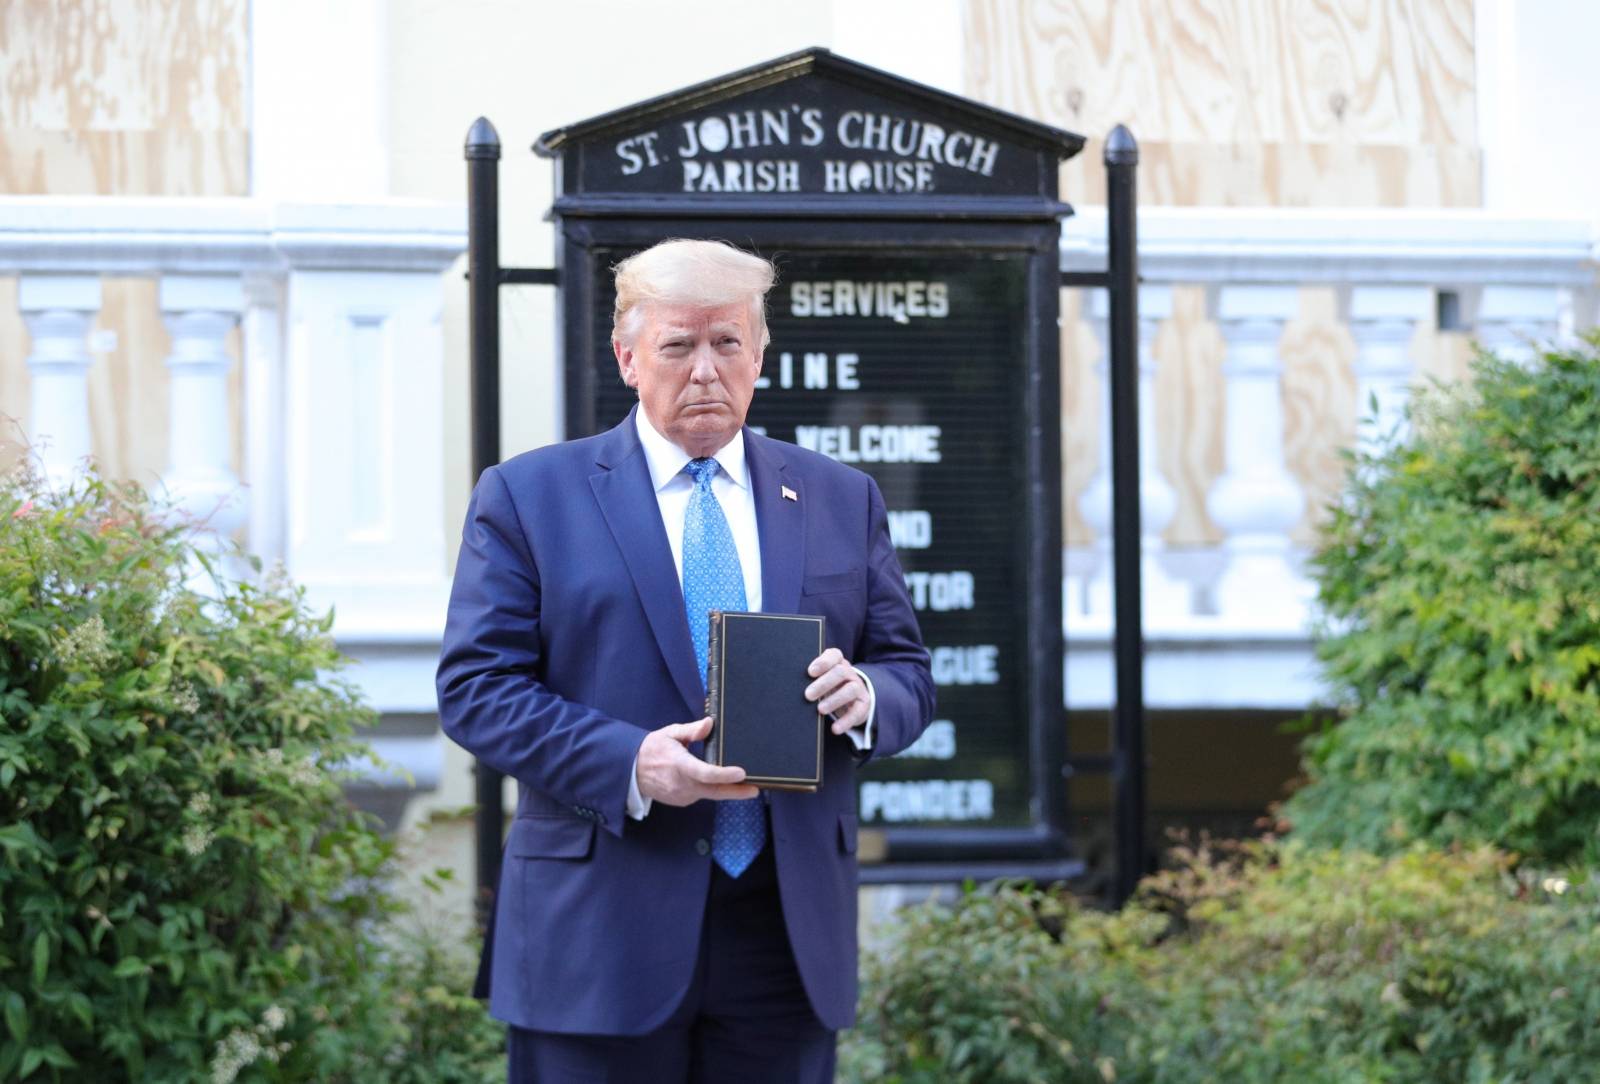 U.S. President Trump holds up Bible during photo opp in front of St John's Church in Washington